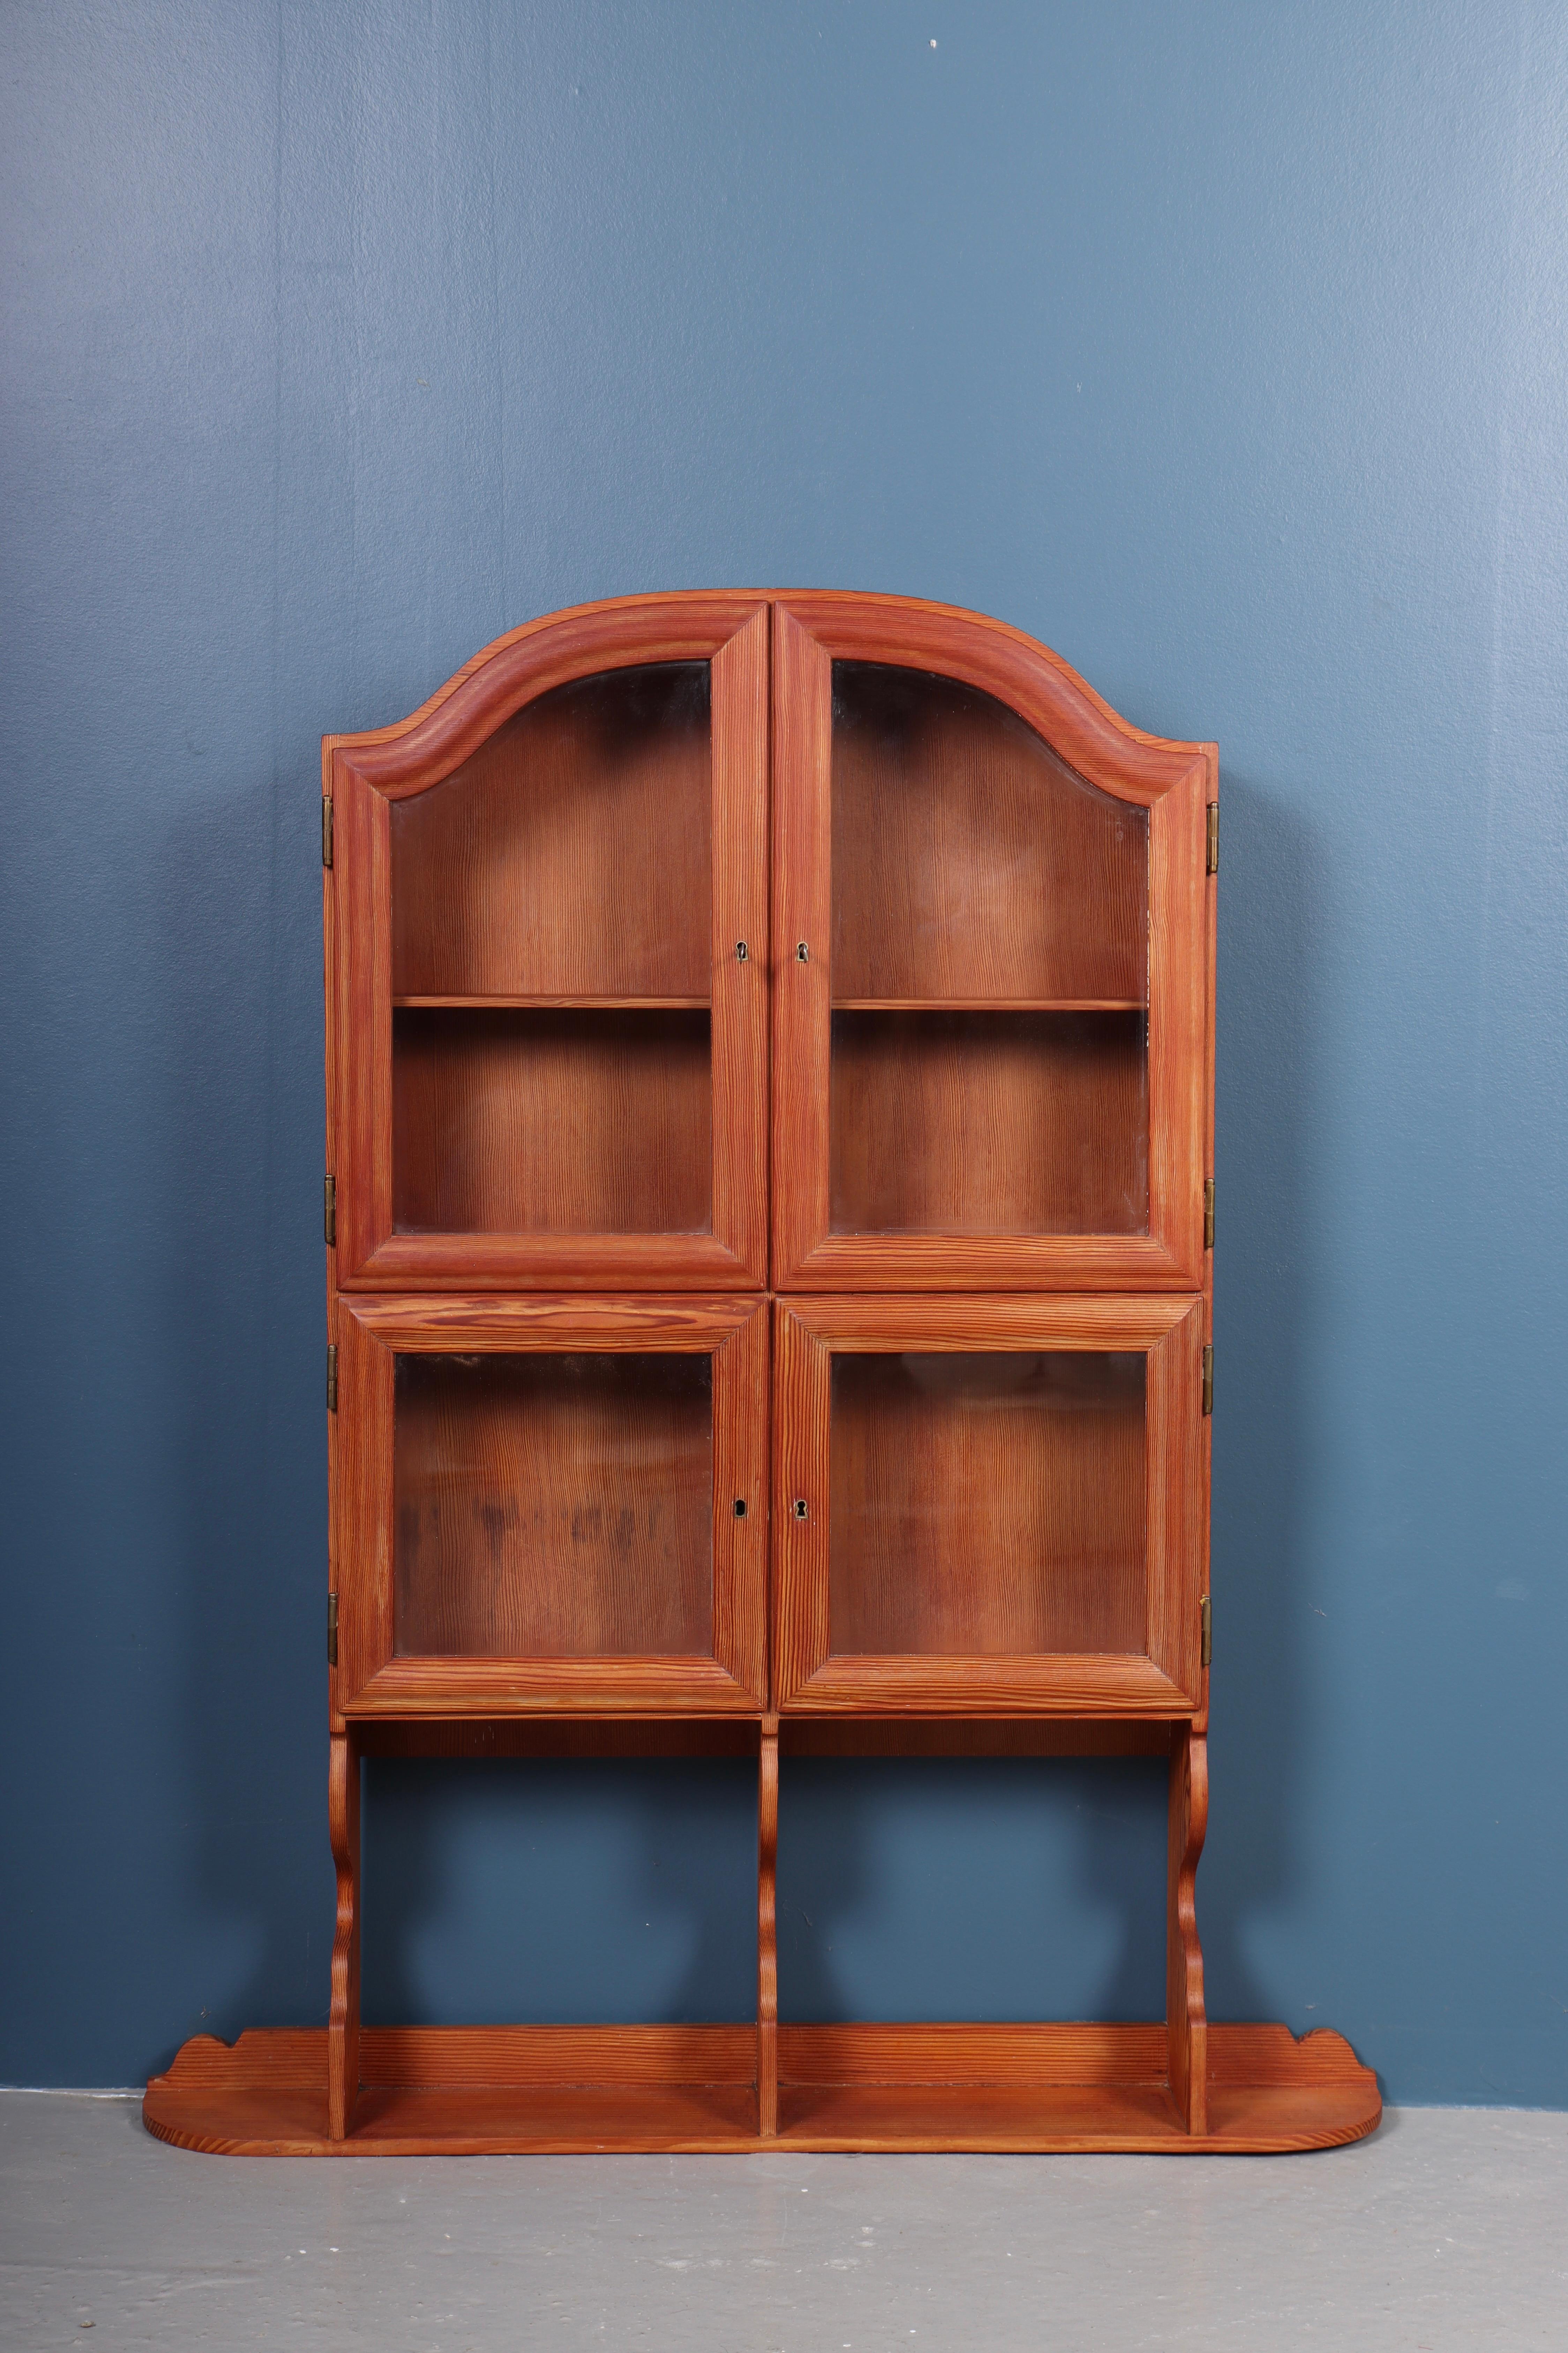 Very rare wall display cabinet in patinated solid pine. Designed by MAA. Martin Nyrop as interior for Bispebjerg hospital in 1913. Made in Denmark by Cabinetmaker Rud Rasmussen cabinetmakers. Great original condition.

